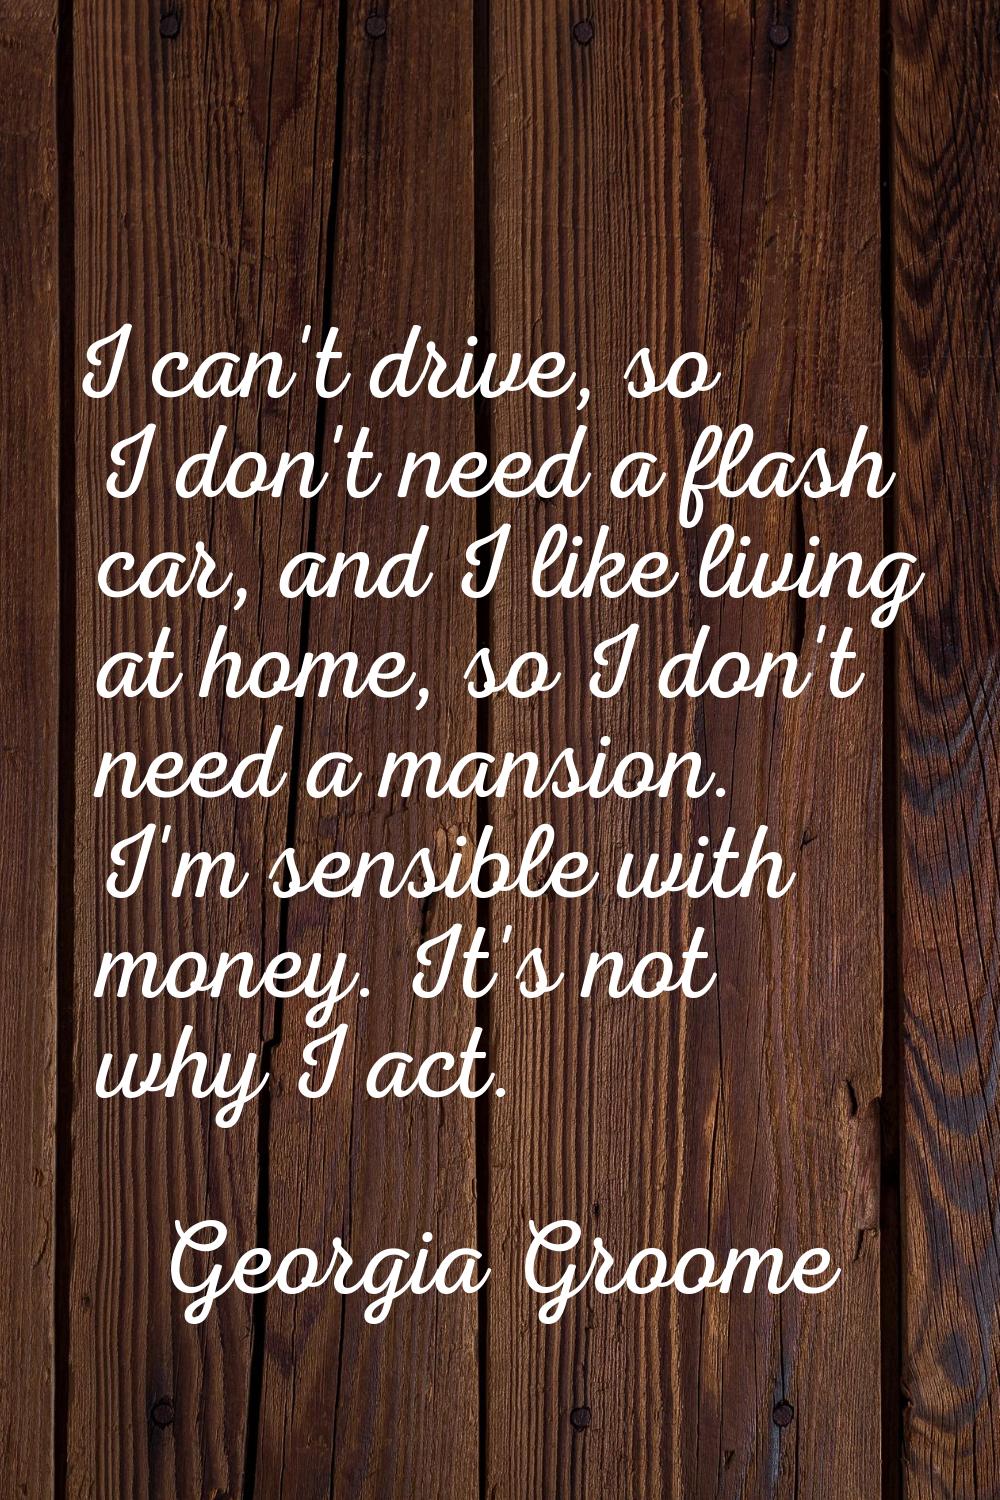 I can't drive, so I don't need a flash car, and I like living at home, so I don't need a mansion. I